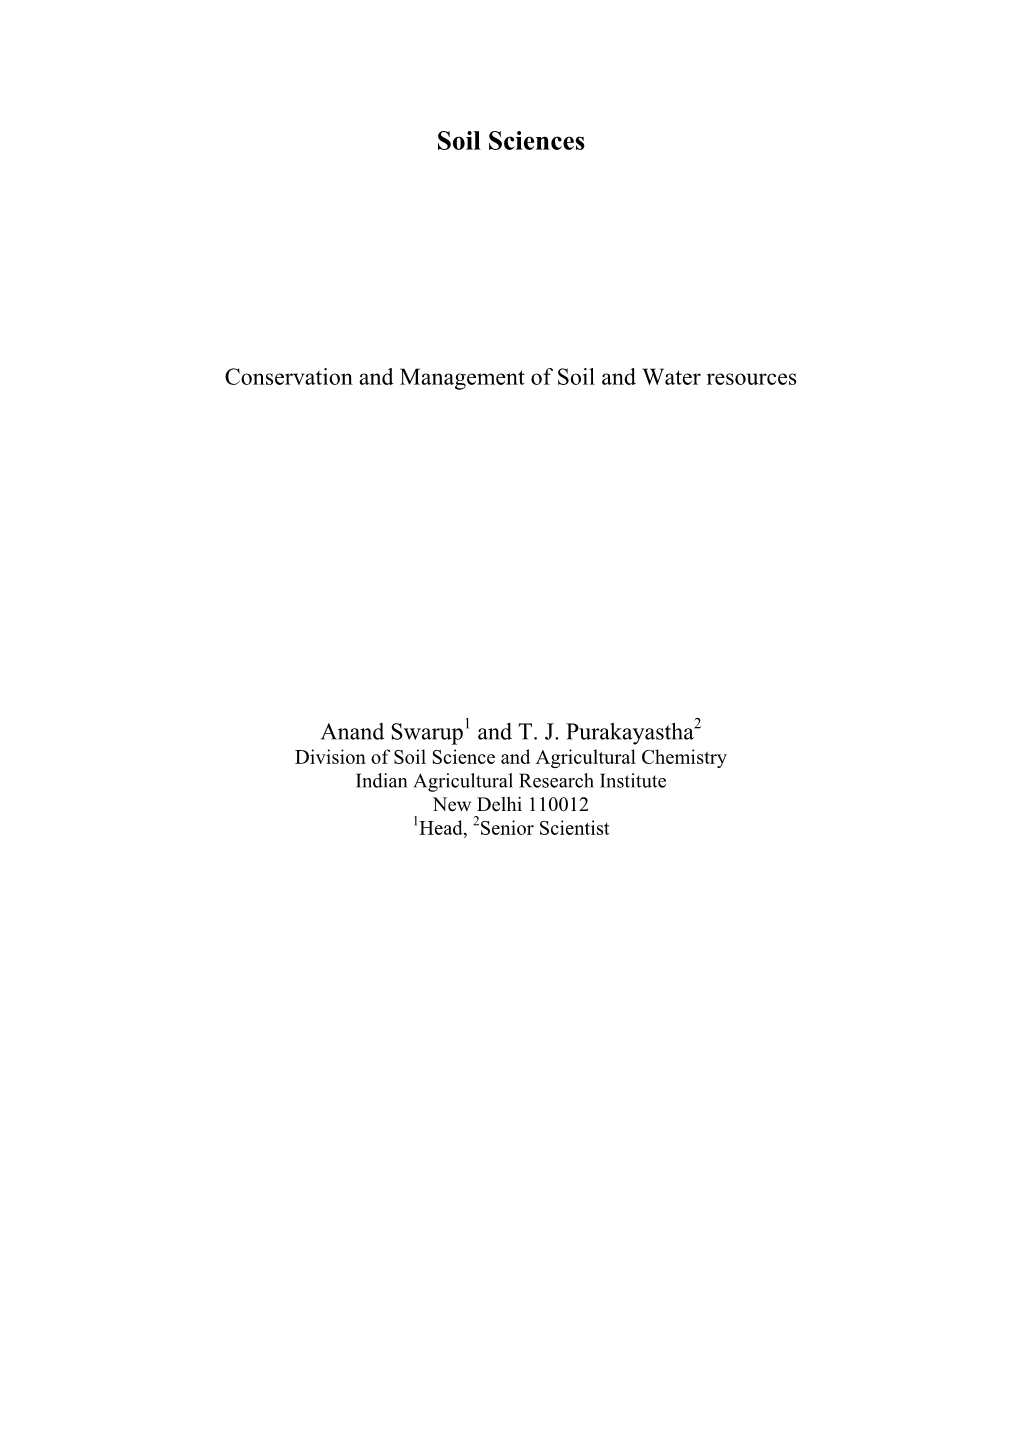 Conservation and Management of Soil and Water Resources